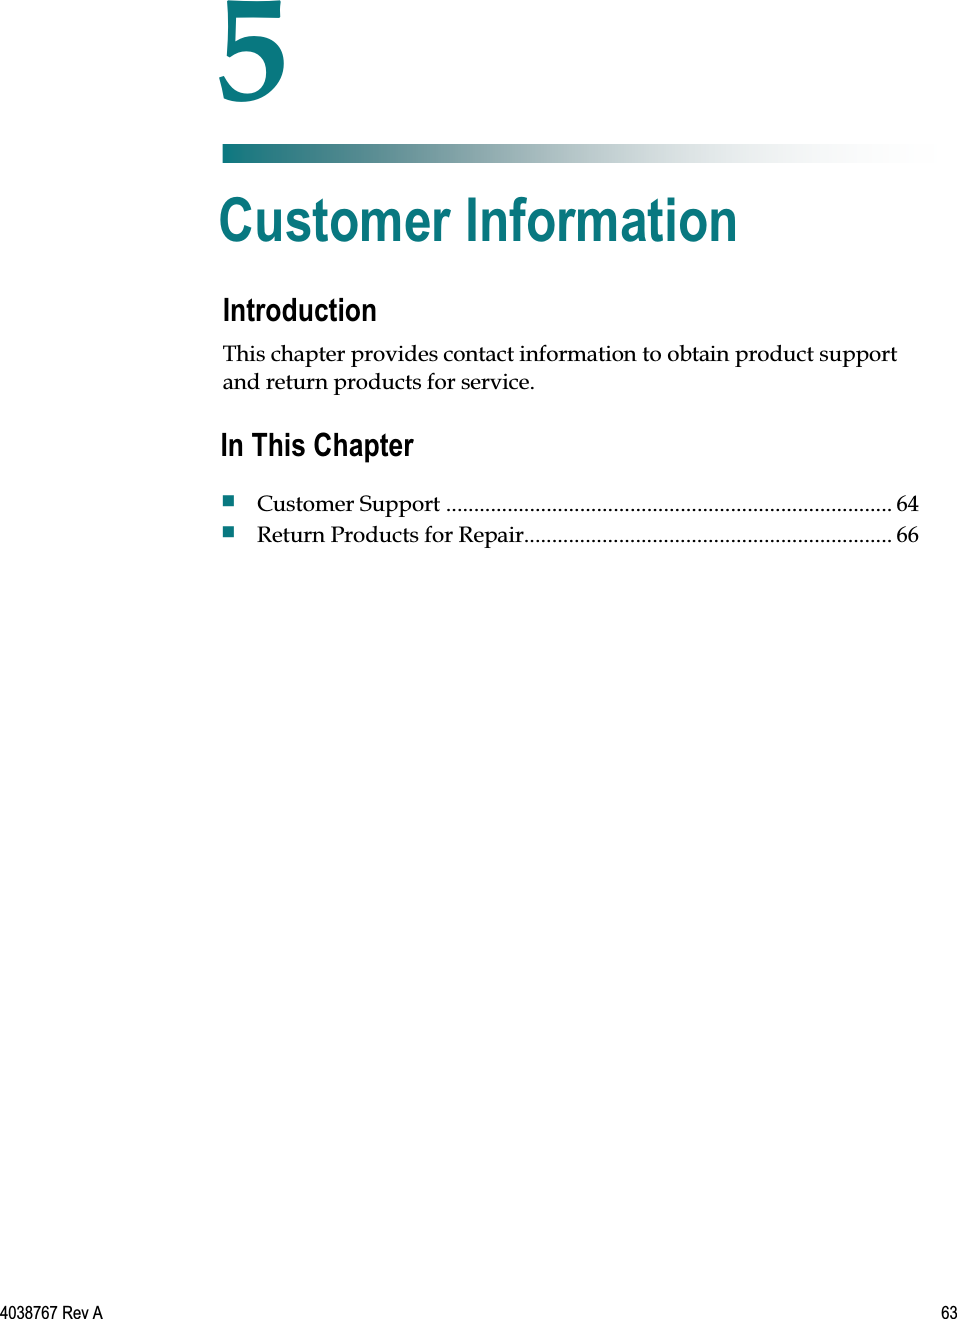   4038767 Rev A  63  Introduction This chapter provides contact information to obtain product support and return products for service.    5 Chapter 5 Customer Information In This Chapter  Customer Support ................................................................................ 64  Return Products for Repair.................................................................. 66 